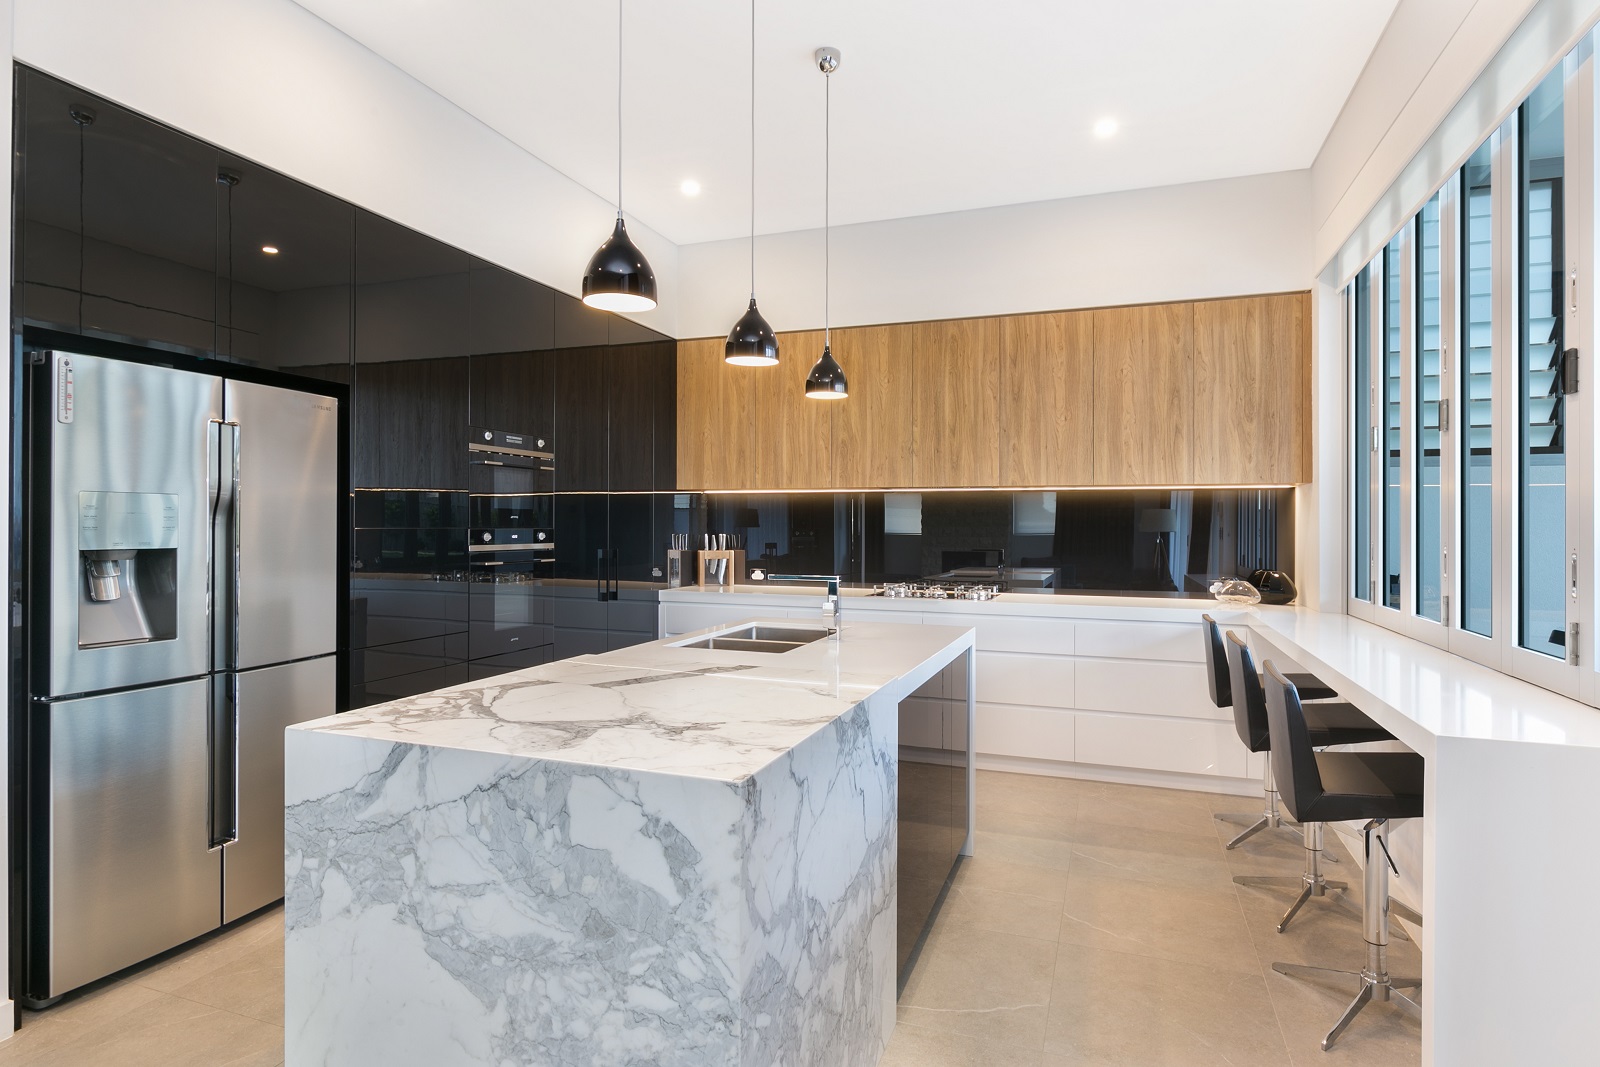 Ultraglaze Likewood kitchen with a feature island cube in a Calacutta Marble - Guildford, Sydney